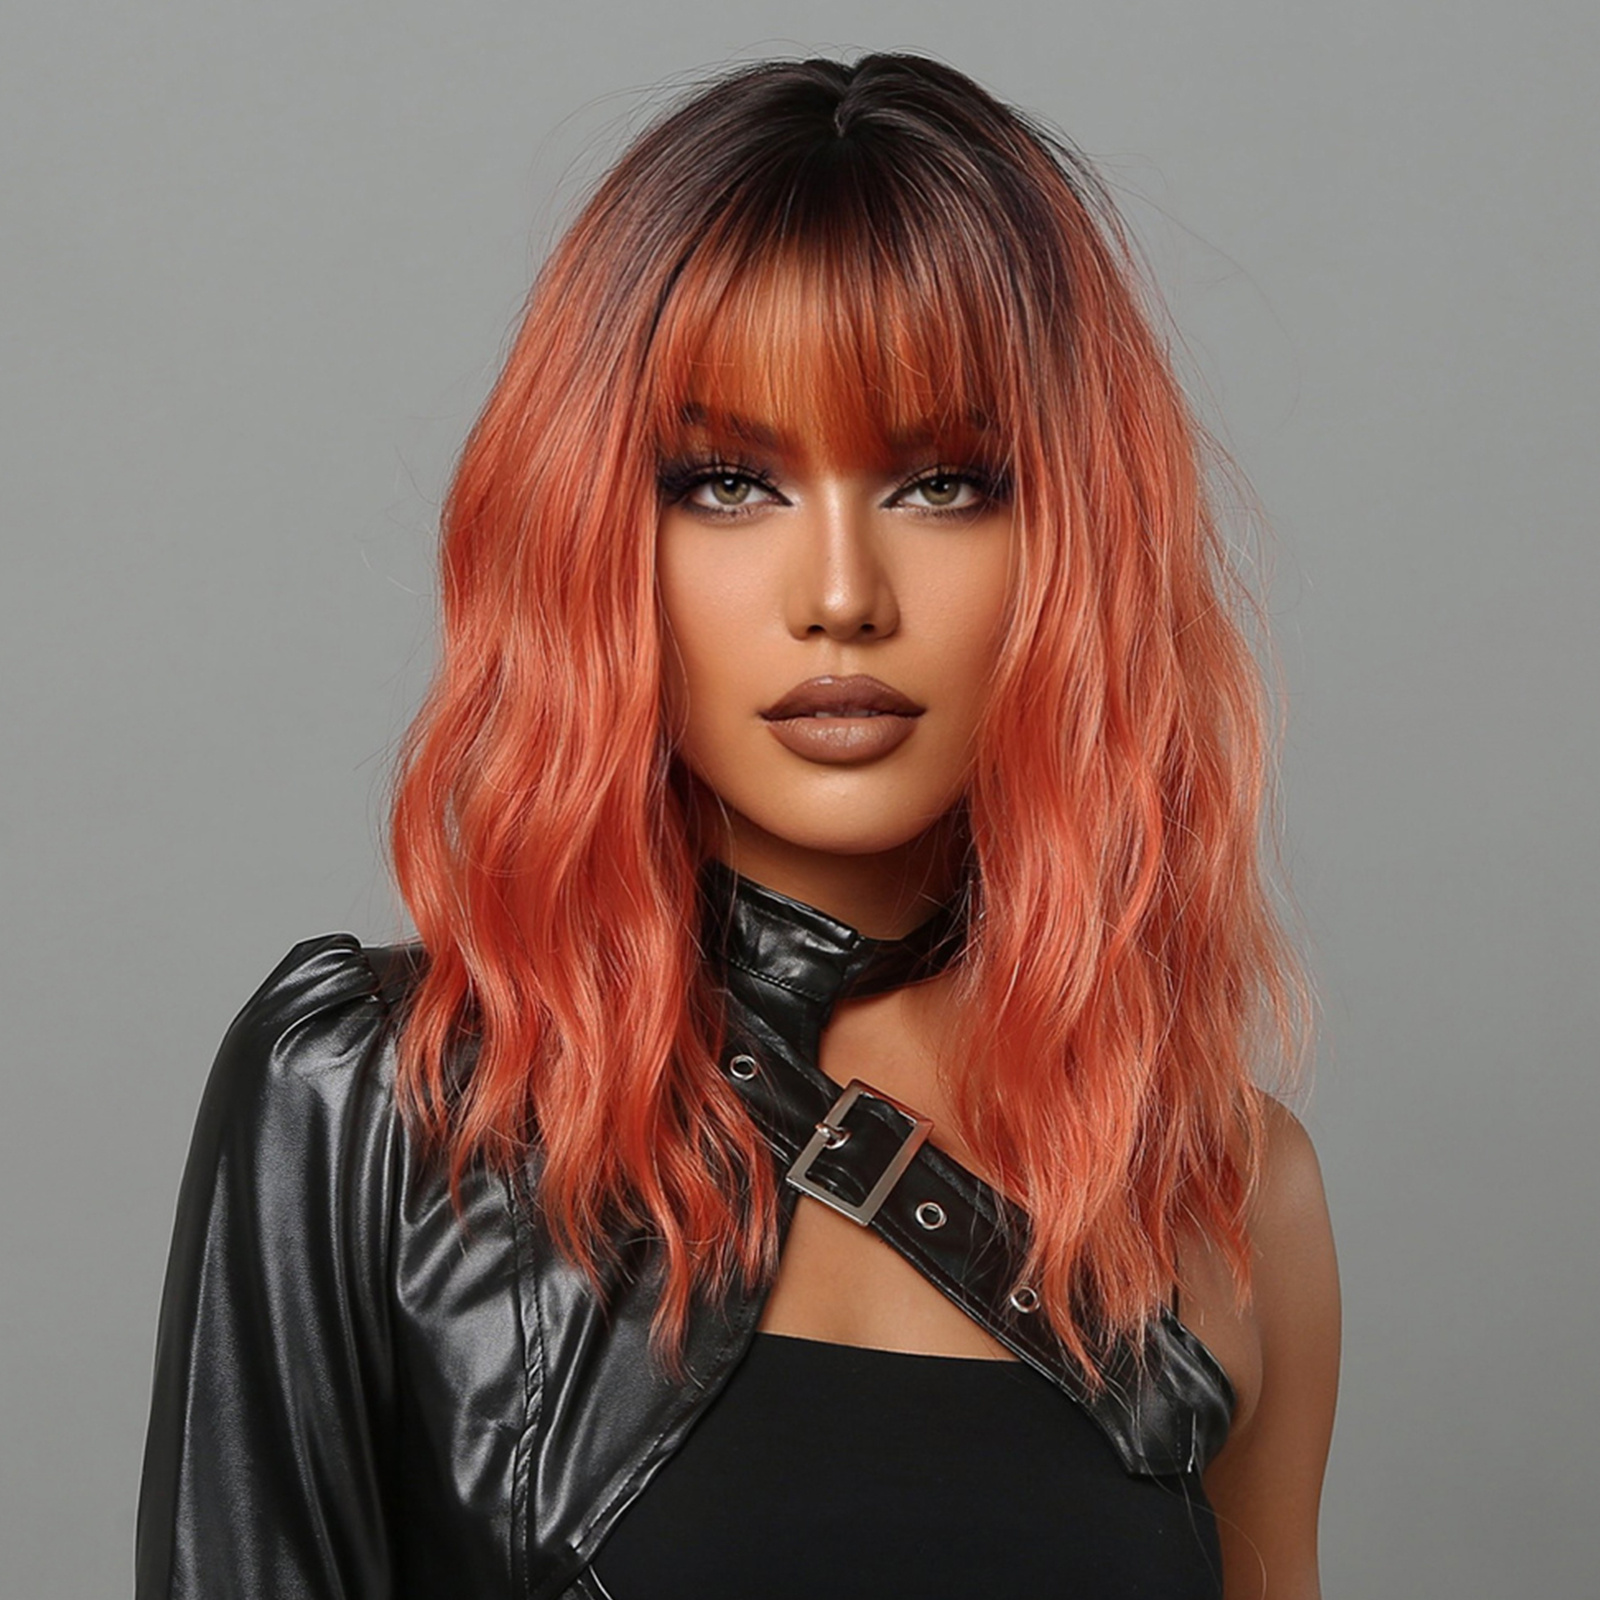 

Stylish Bob Water Wave Wig With Ombre Brown And Dark Red Bangs For Women - Perfect For Any Occasion Music Festival